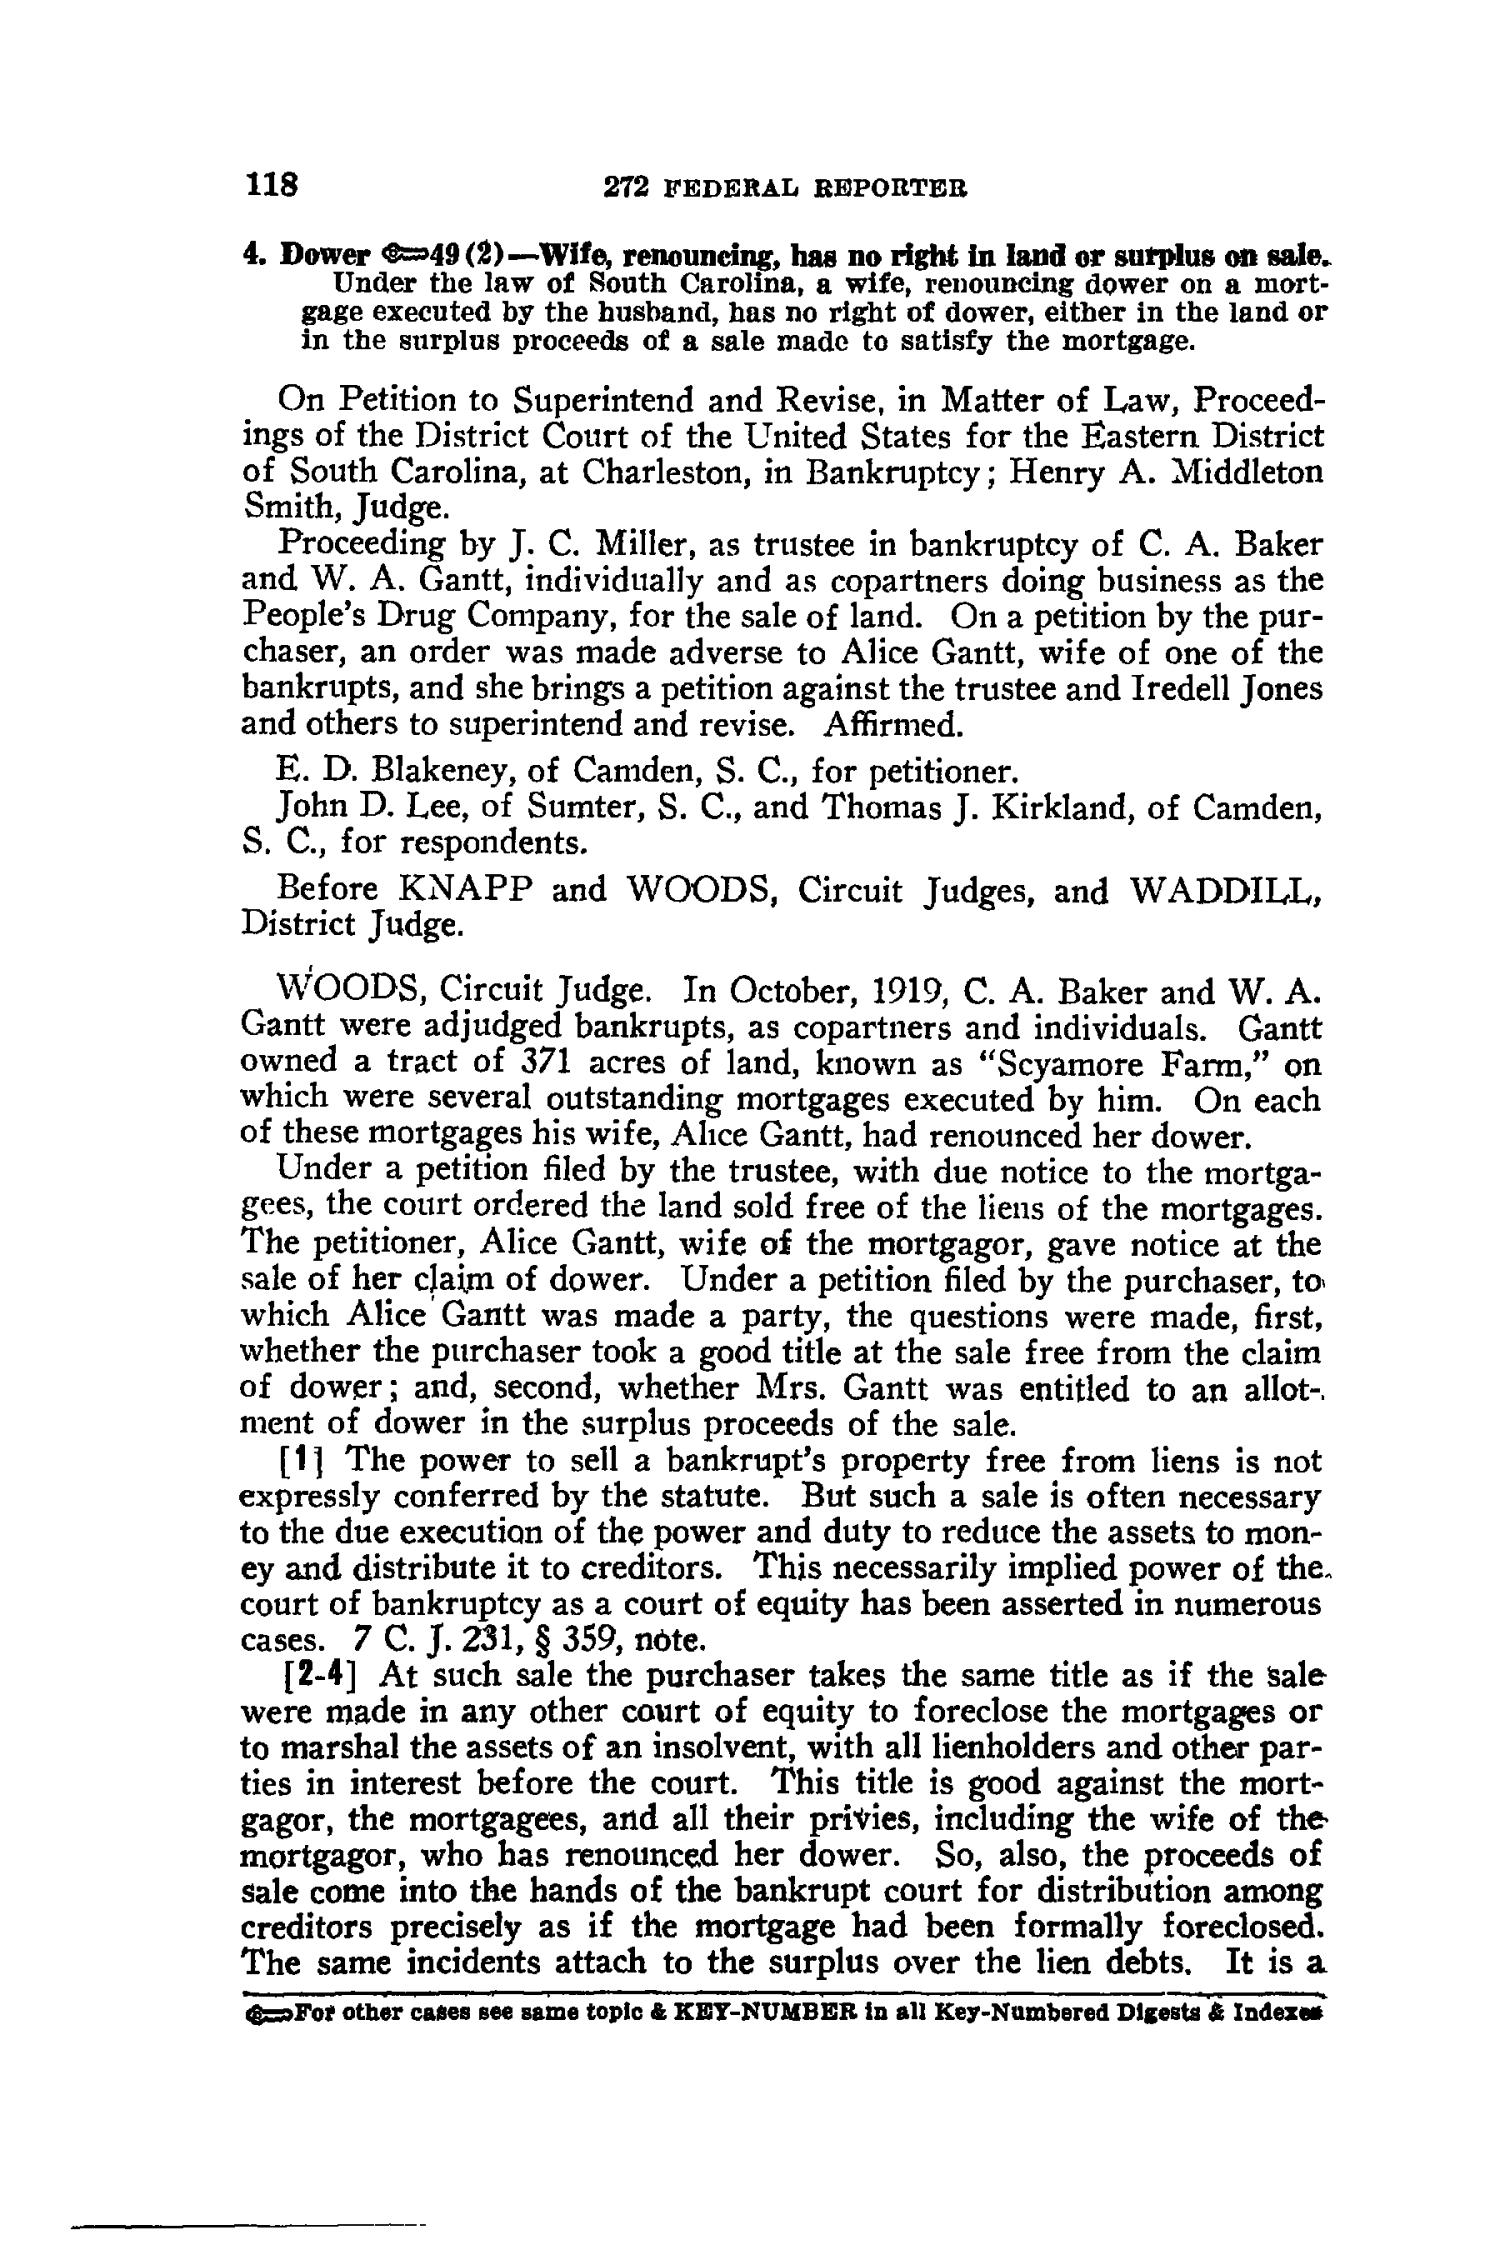 The Federal Reporter with Key-Number Annotations, Volume 272: Cases Argued and Determined in the Circuit Courts of Appeals and District Courts of the United States and the Court of Appeals in the District of Columbia,  June-August, 1921.
                                                
                                                    118
                                                